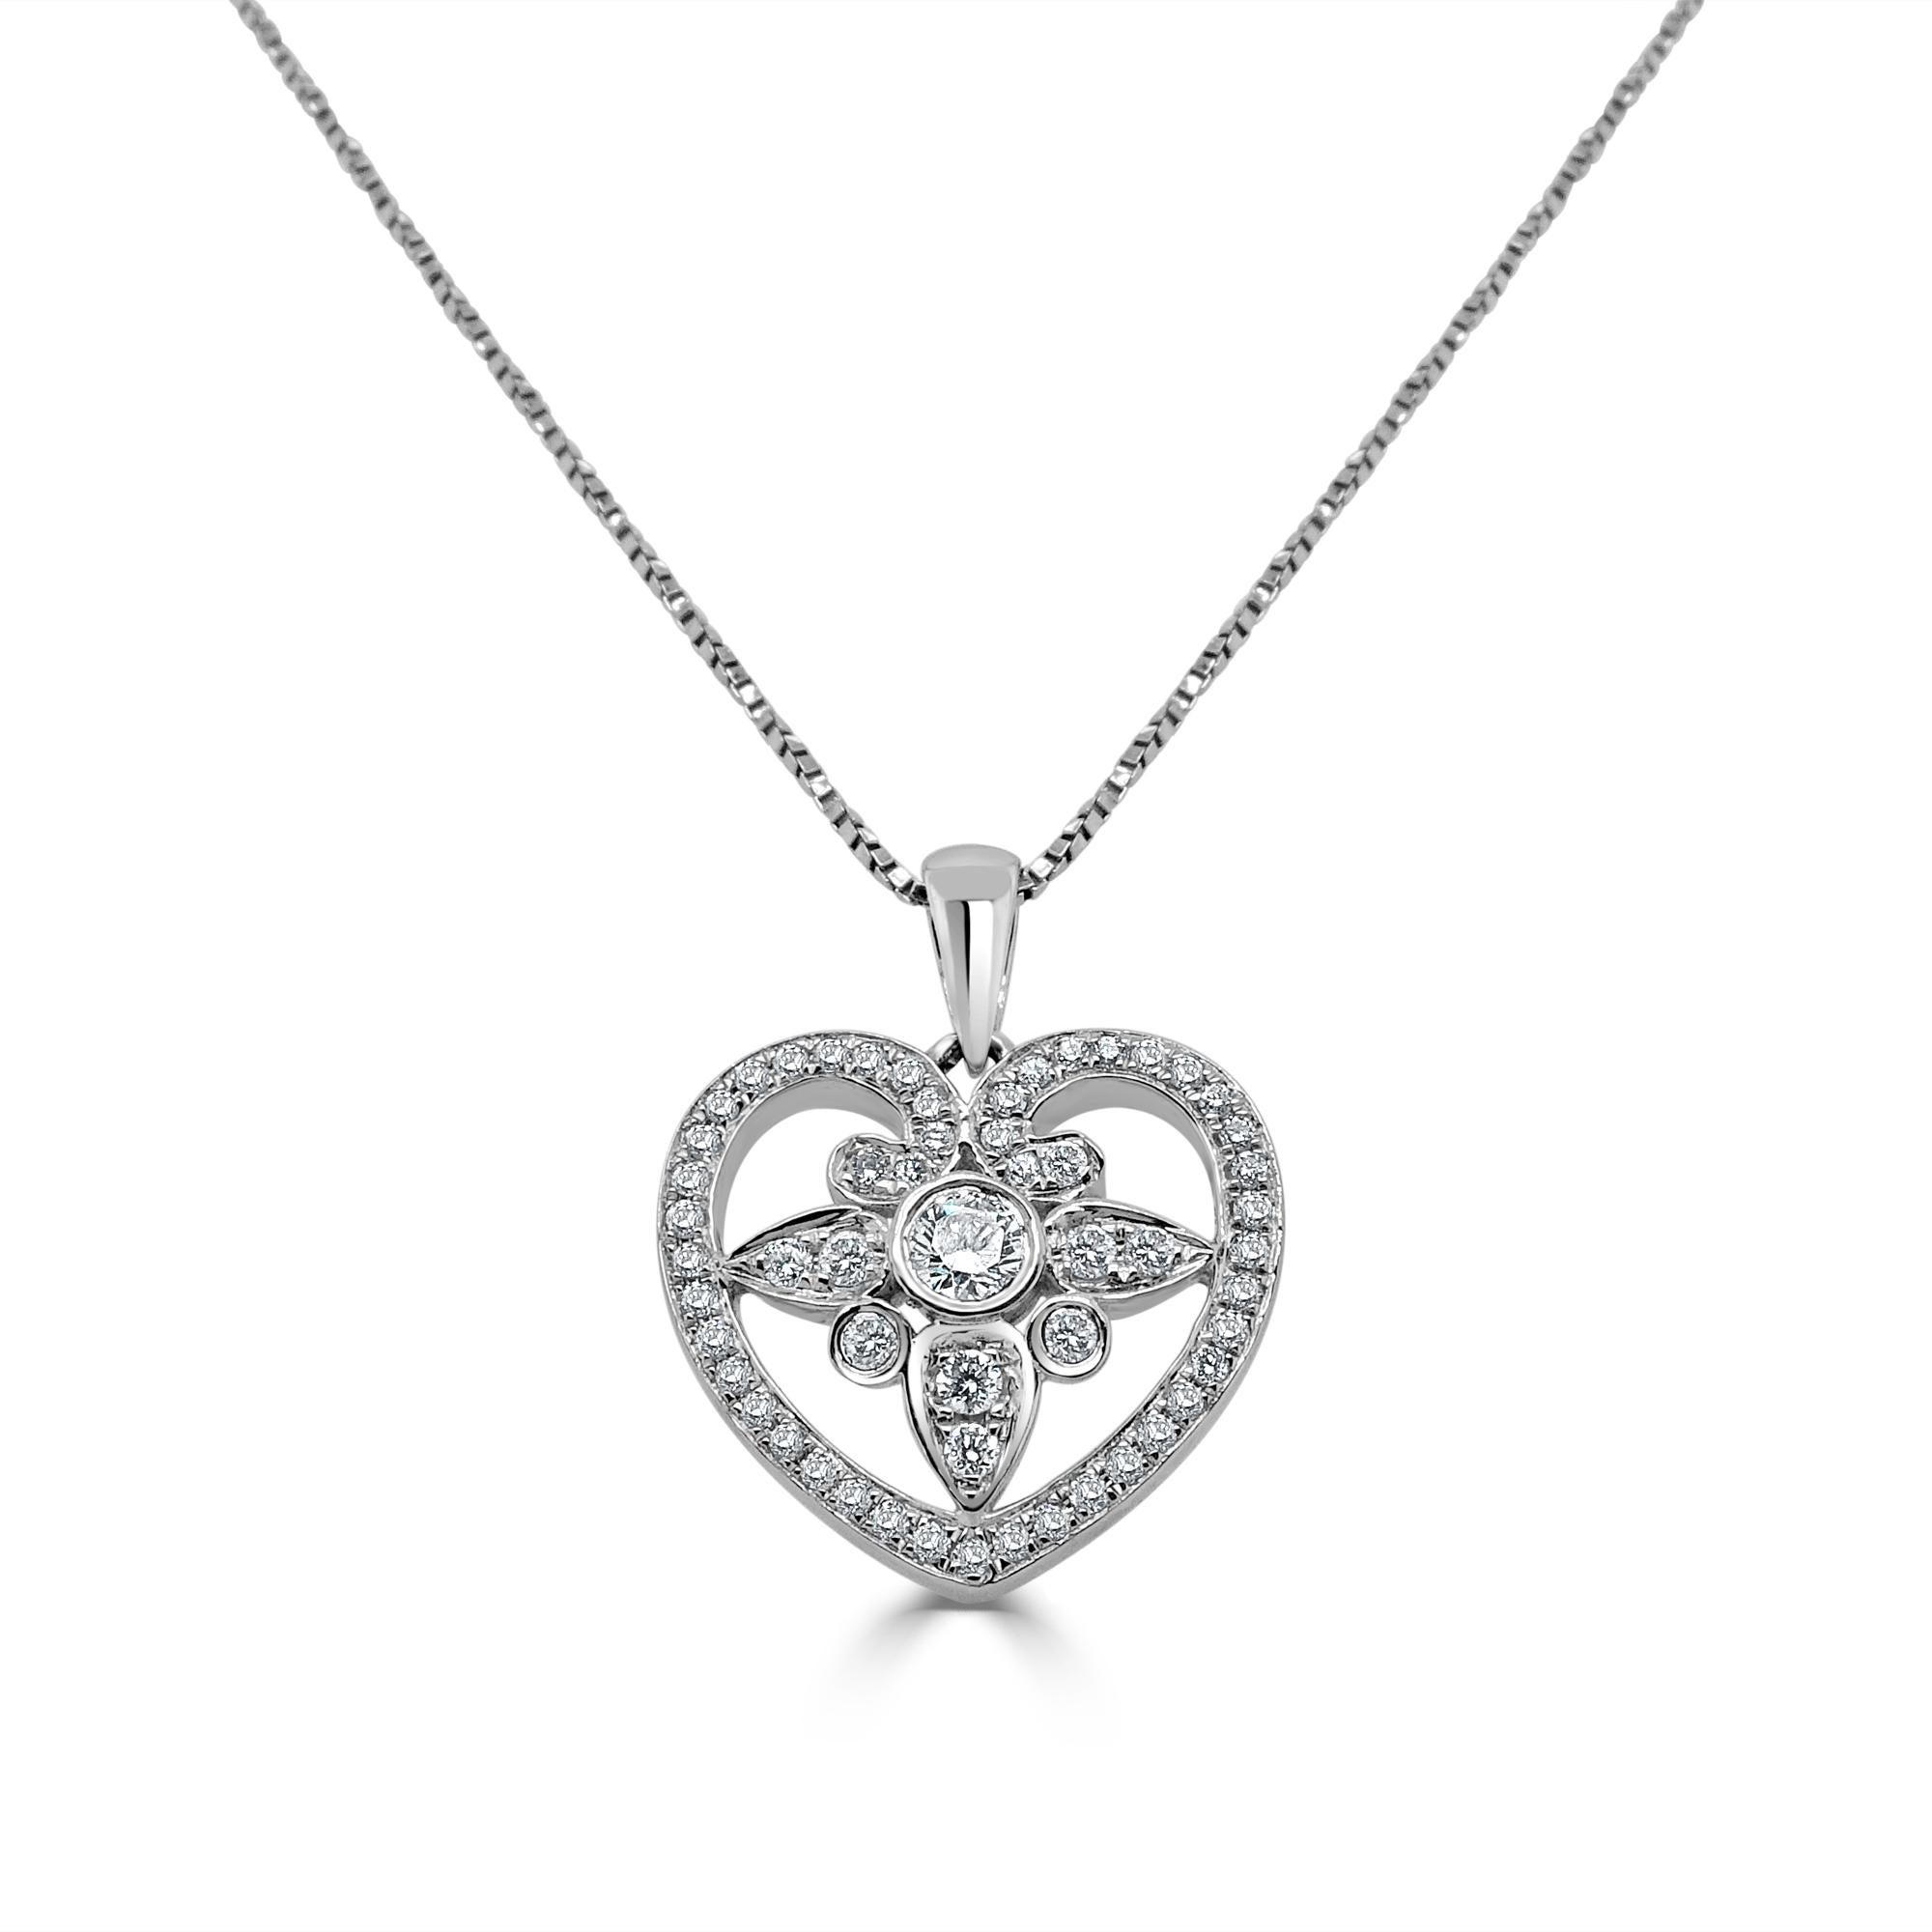 18 Karat White Gold 0.31 Carat Diamond Chain Necklace Wedding Fine Jewelry 

You will fall head over heels in love with this breathtaking heart shape pendant.Gentle and elegant heart shape pendant is crafted in a sleek white gold. Featuring round